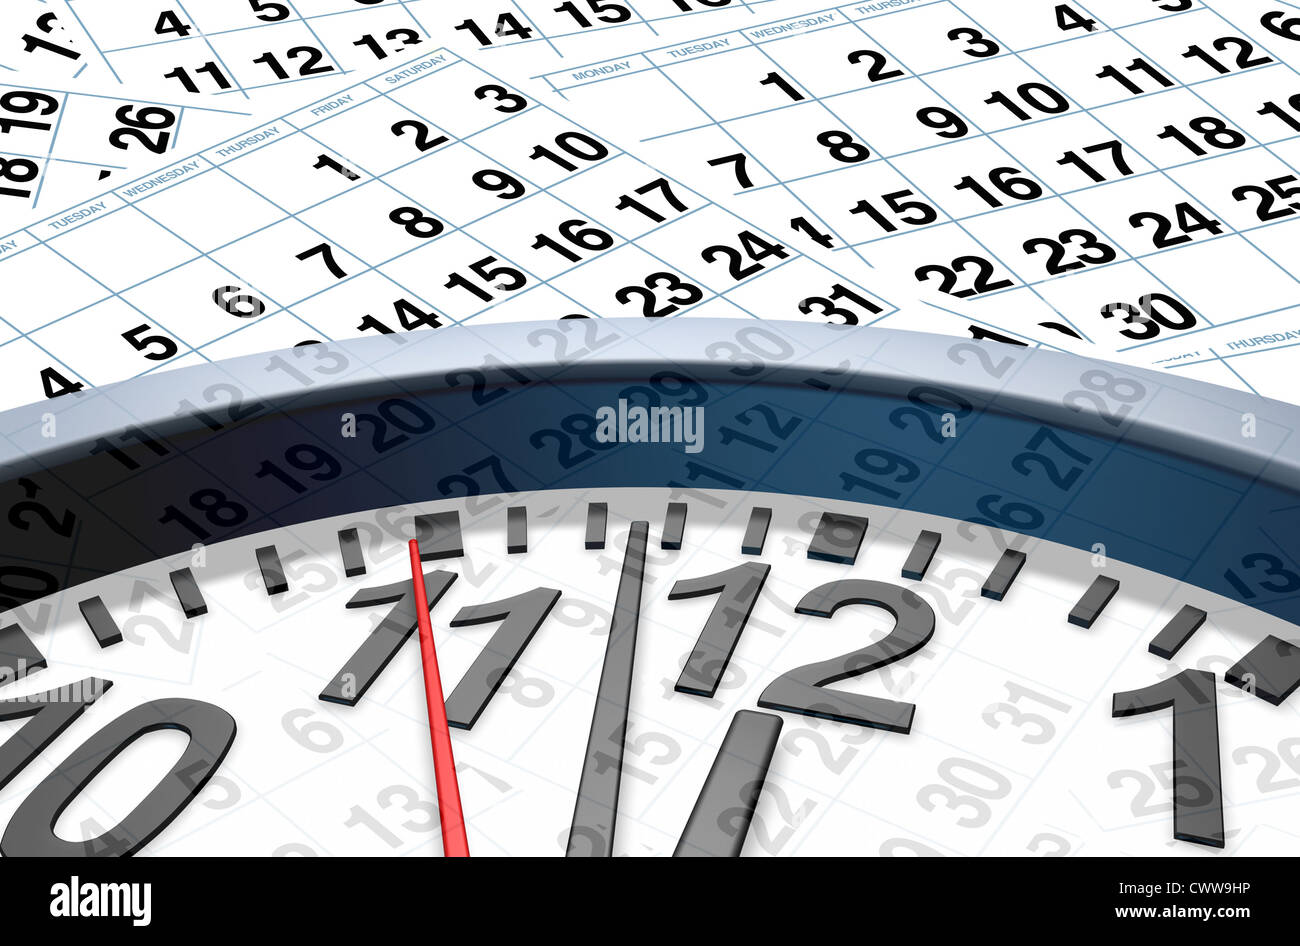 Time and date with calendar pages representing important dates in a month or days of the week represented by individual pages with numbers. Stock Photo